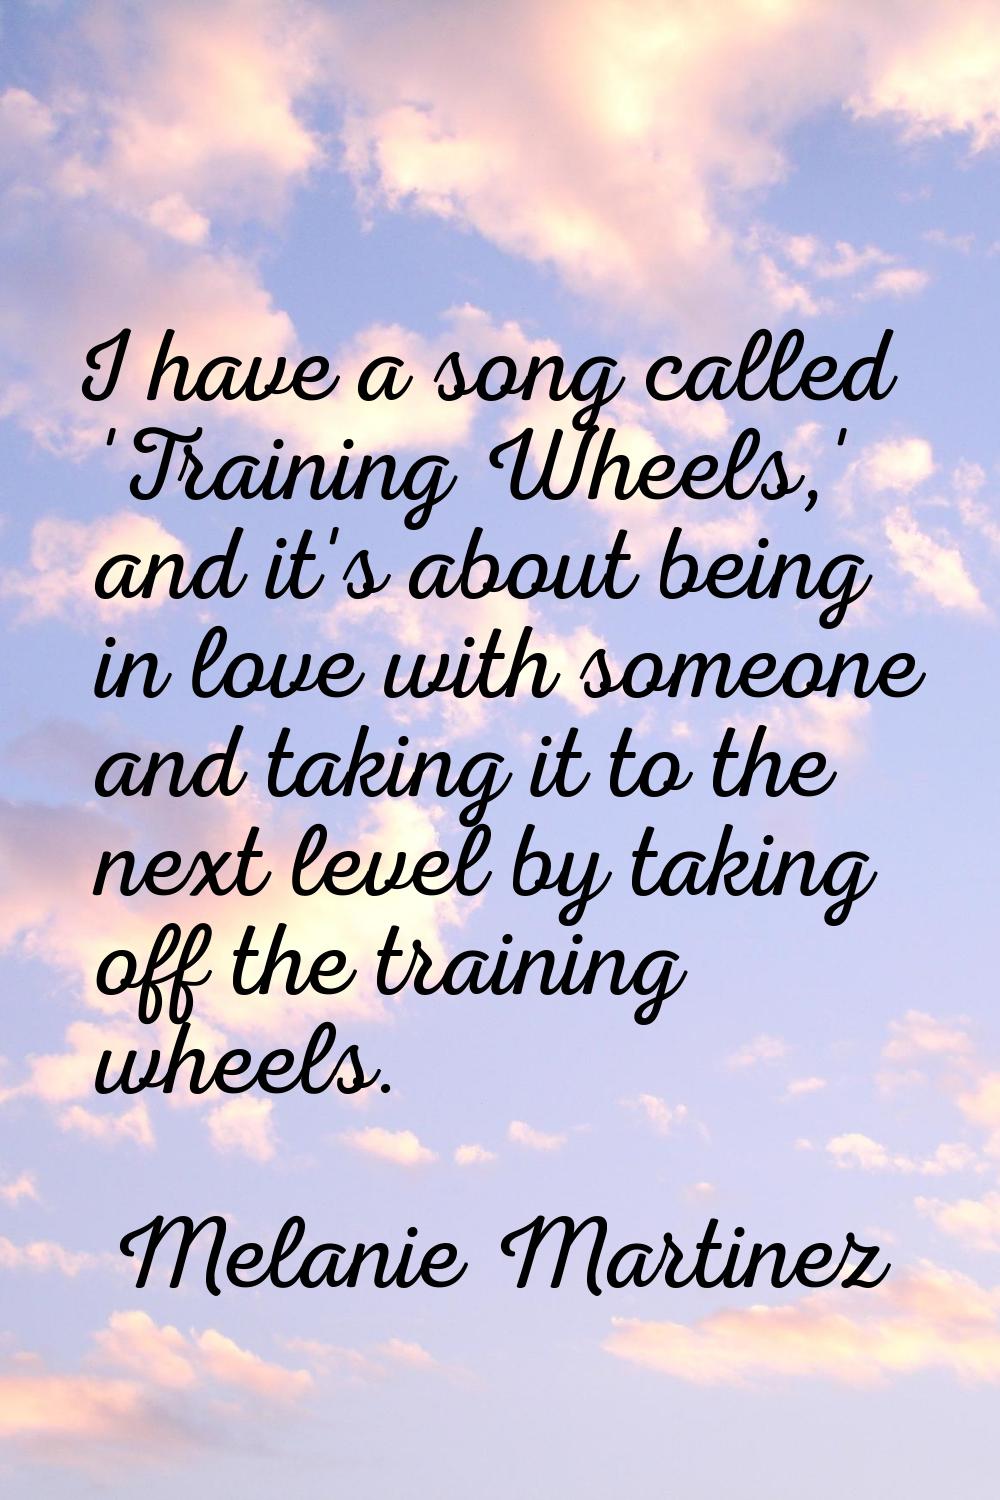 I have a song called 'Training Wheels,' and it's about being in love with someone and taking it to 